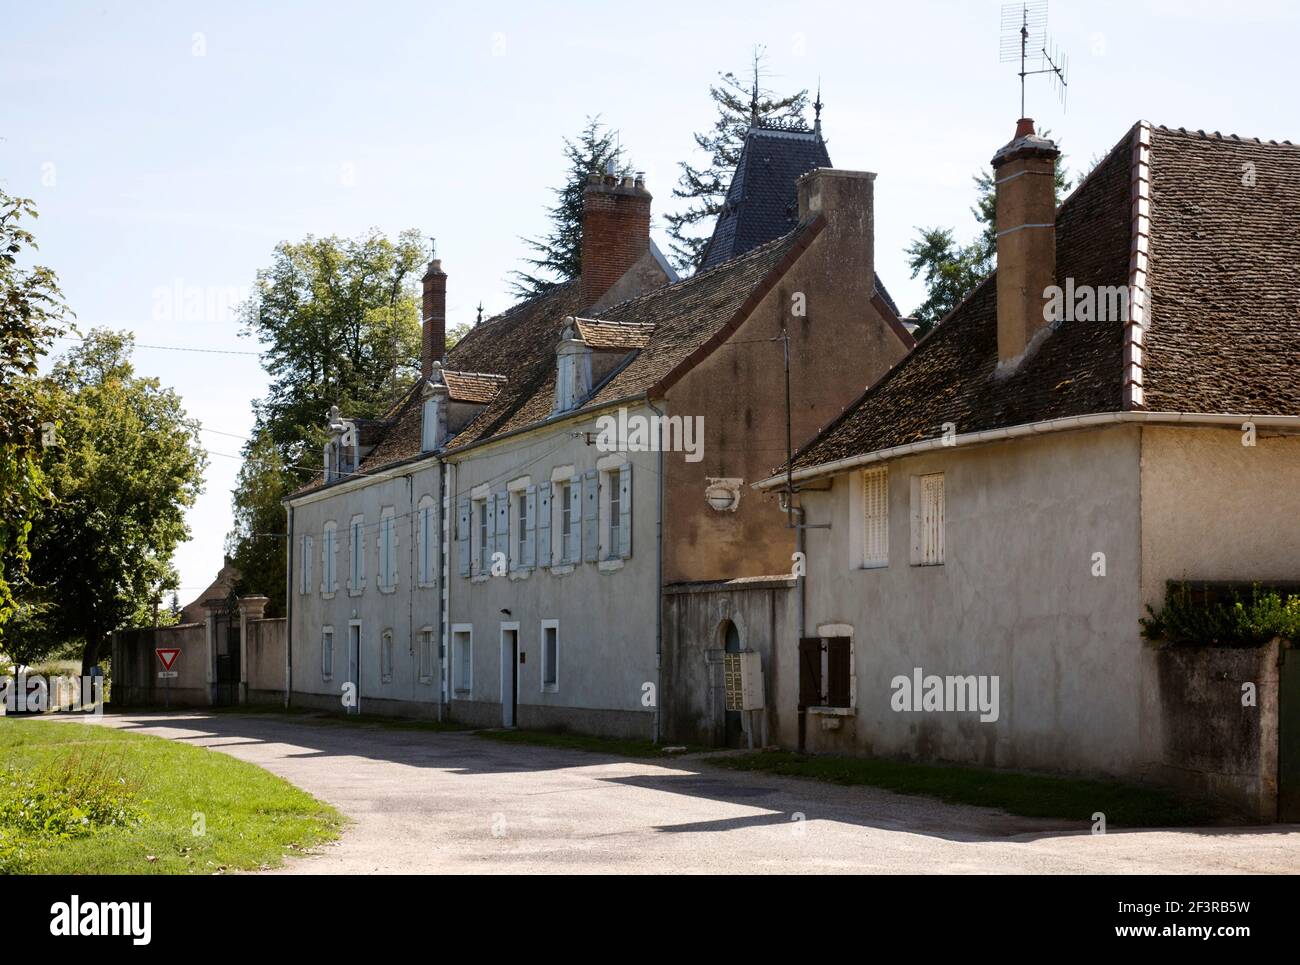 House and studio of Joseph Nicephore Niepce, inventor of photography, where first photograph taken in 1826, Saint-Loup-de-Varennes, Chalon-sur-Saone, Stock Photo